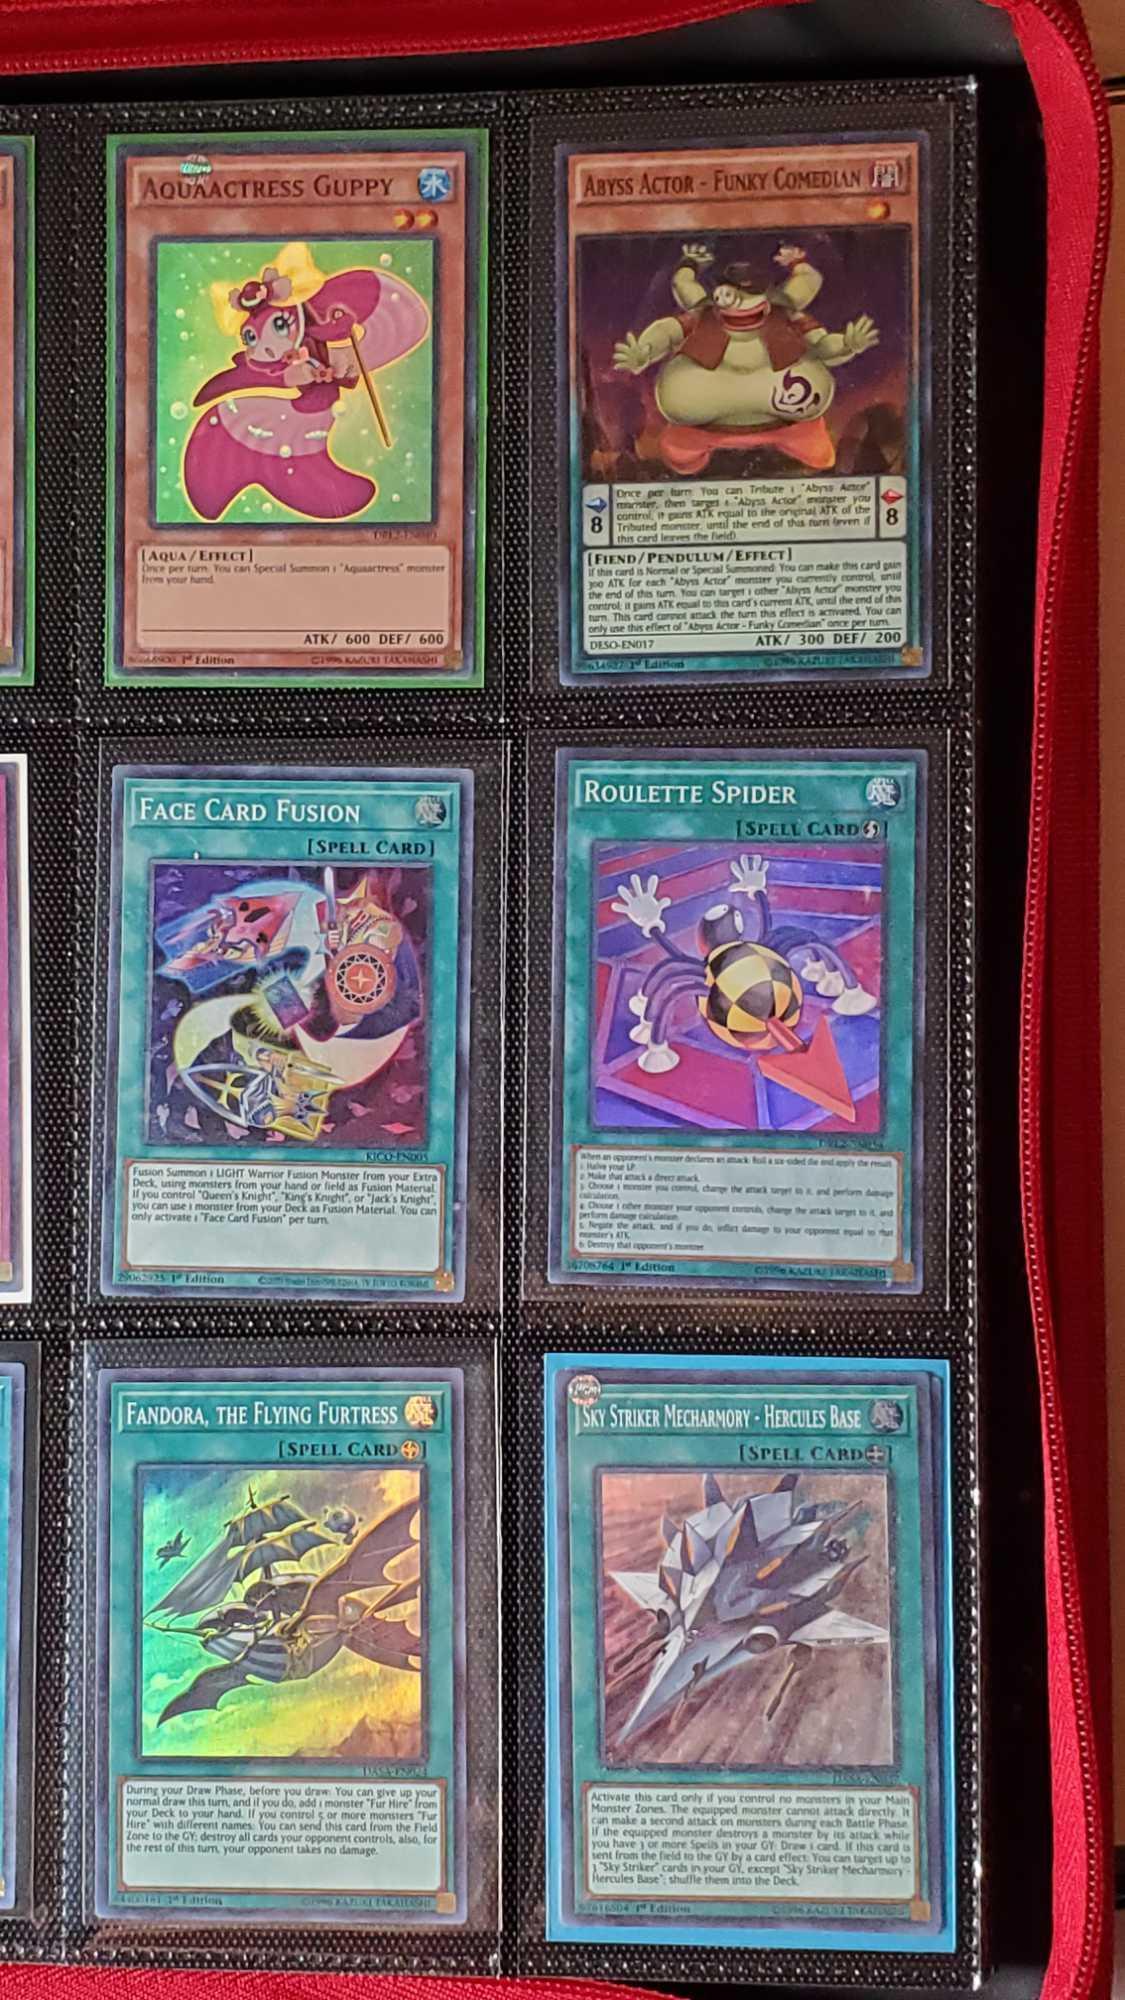 Album of 480 Yu-Gi-Oh! Limited Edition, Secret, Ultra and Super Rare First Edition Trading Cards